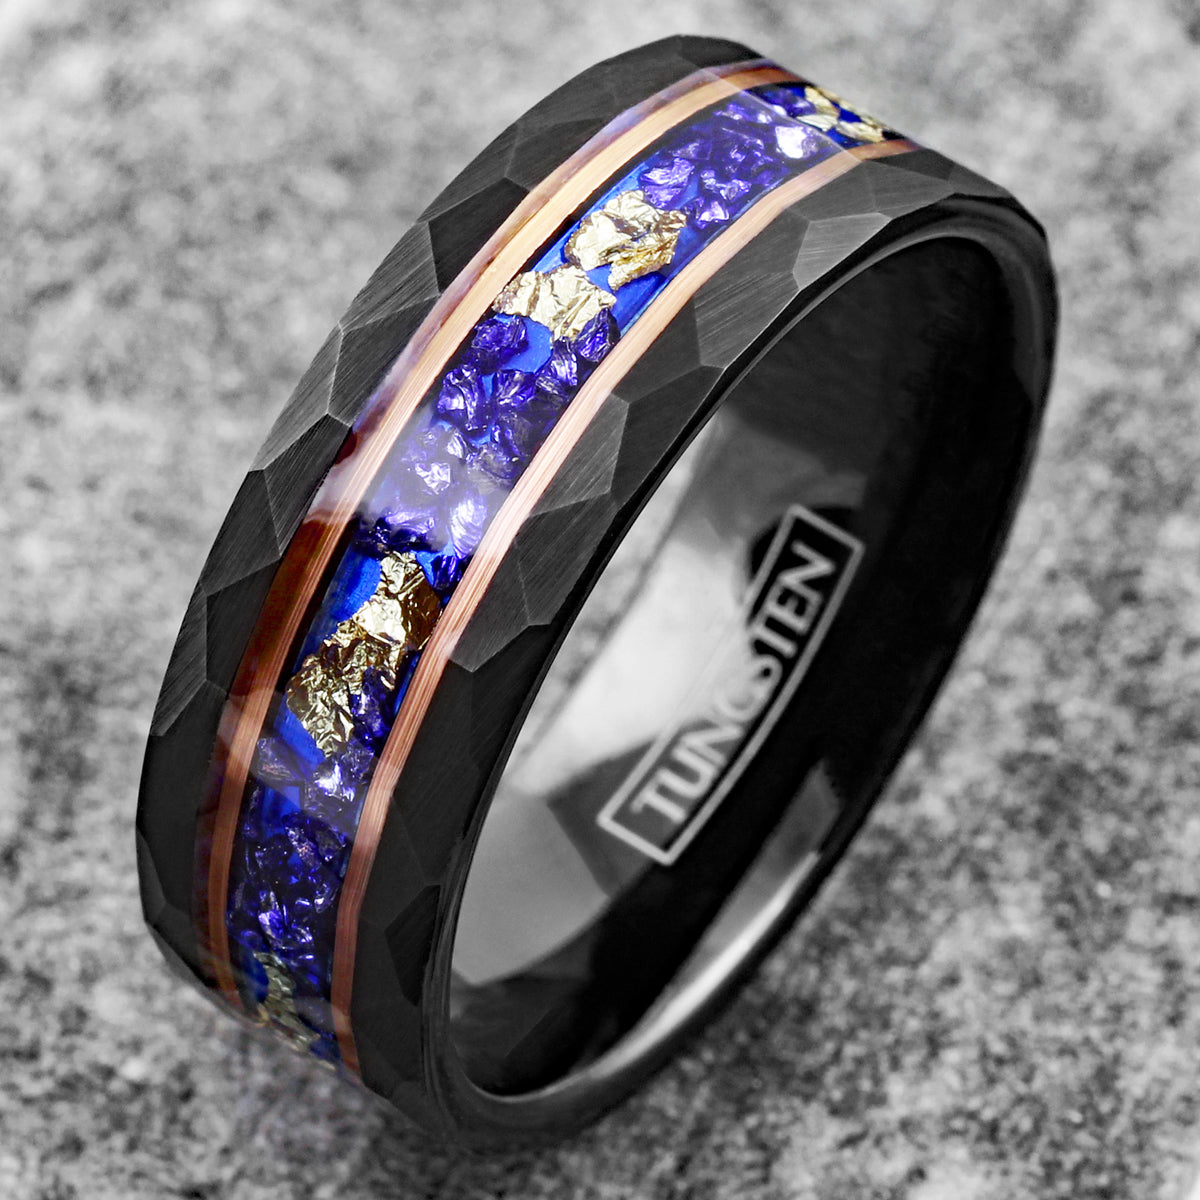 Magnificent Polished Black Tungsten Low Dome Ring with Bright Blue Real Fishing Line Between Whiskey Barrel Oak Wood and Deer Antler Inlays. Couple